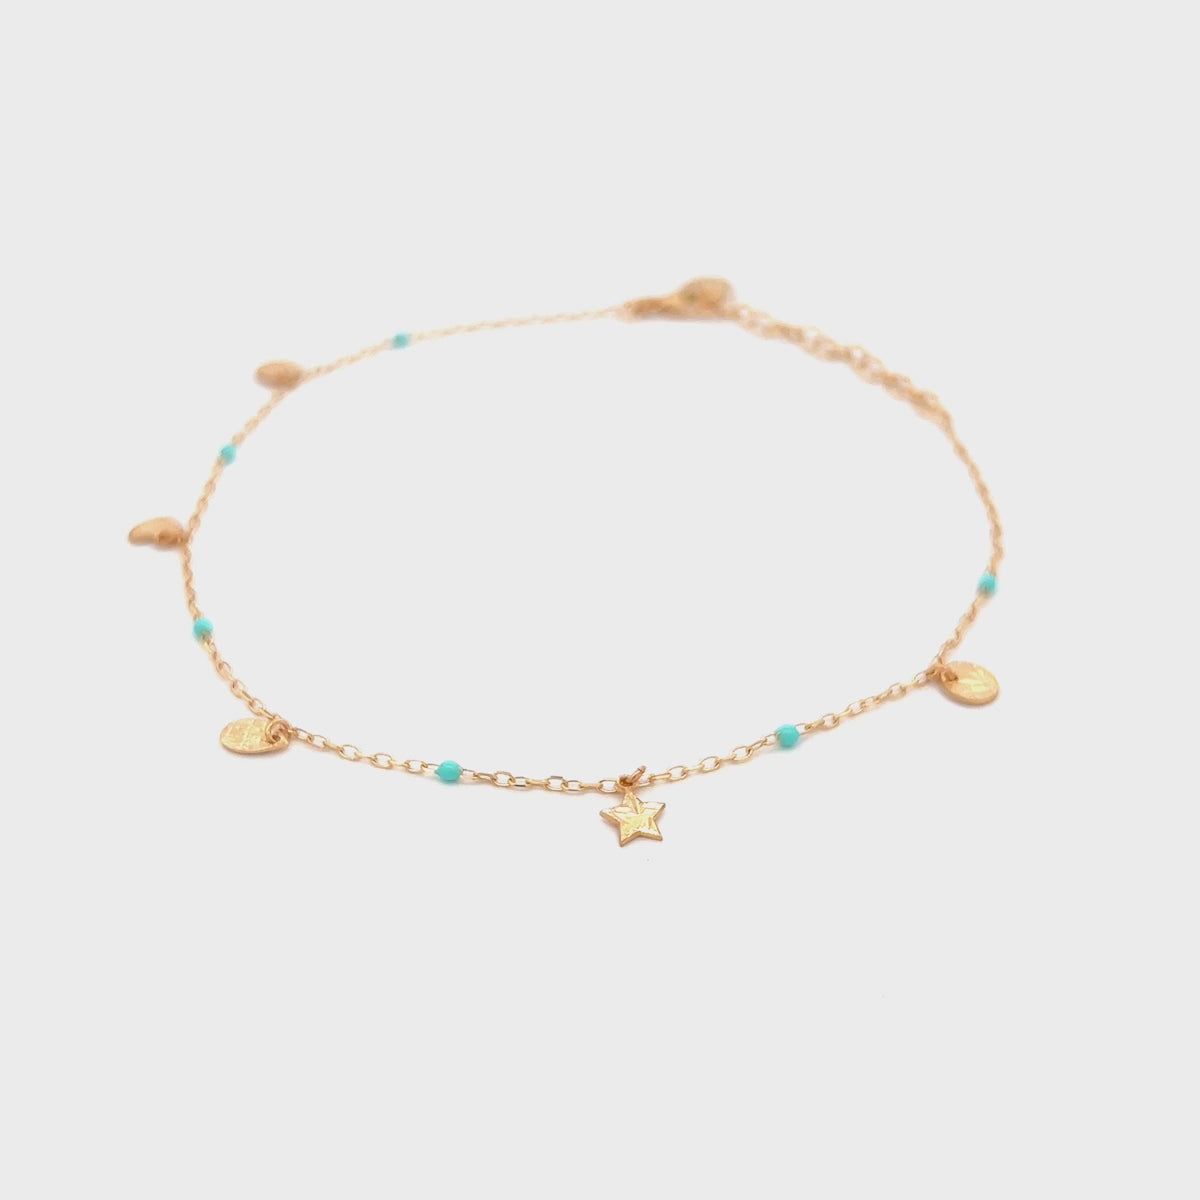 Anklets - Anklet charms and turquoise enamel detail - Anklets Mania - thumbnail - video - 1 | Rue des Mille